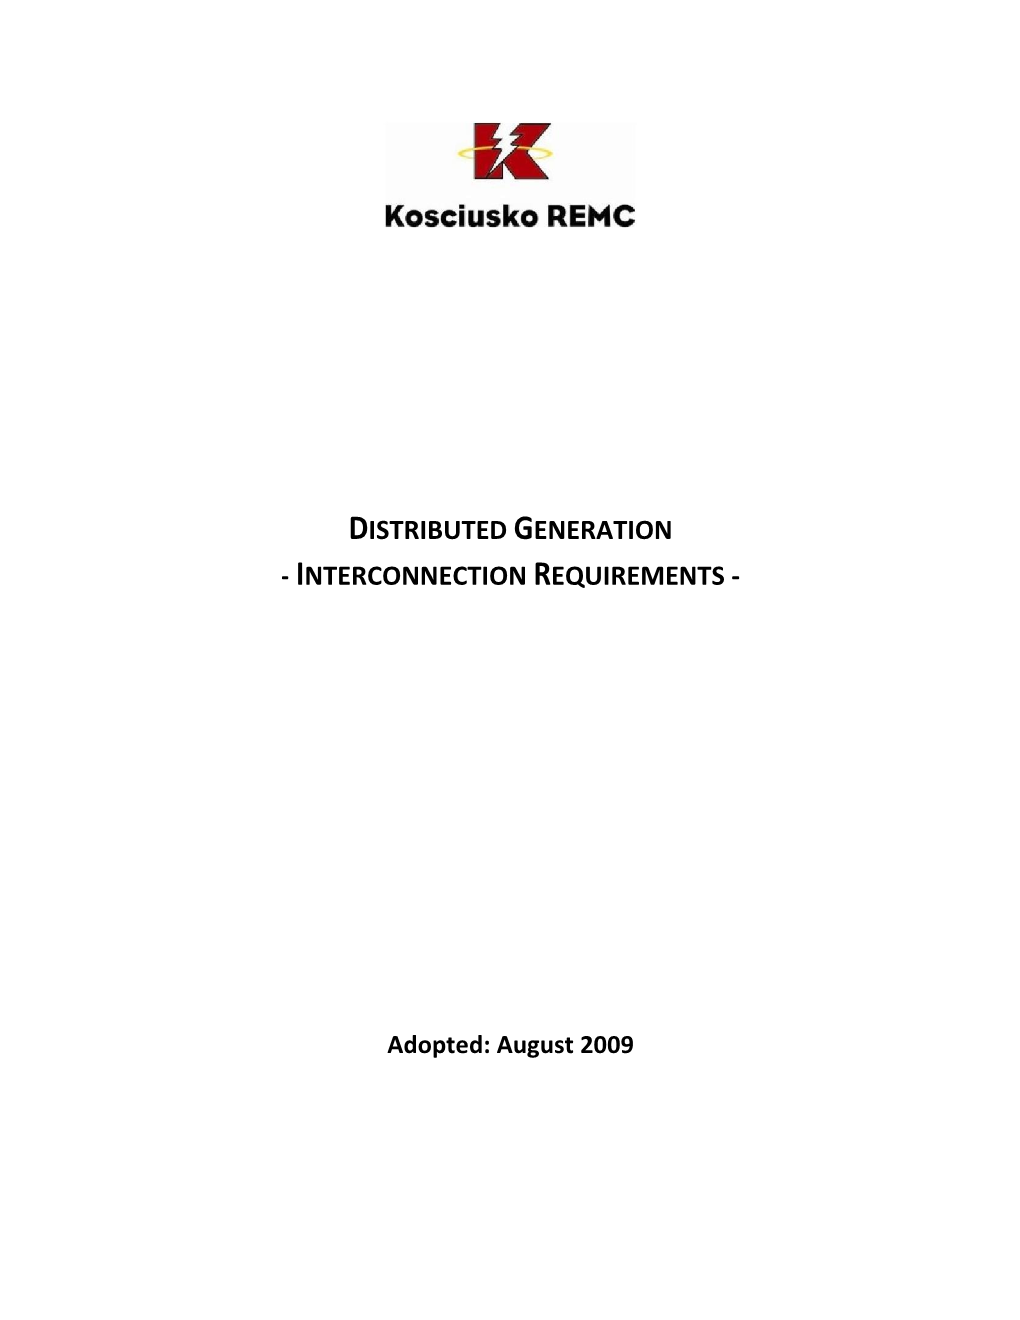 Distributed Generation - Interconnection Requirements